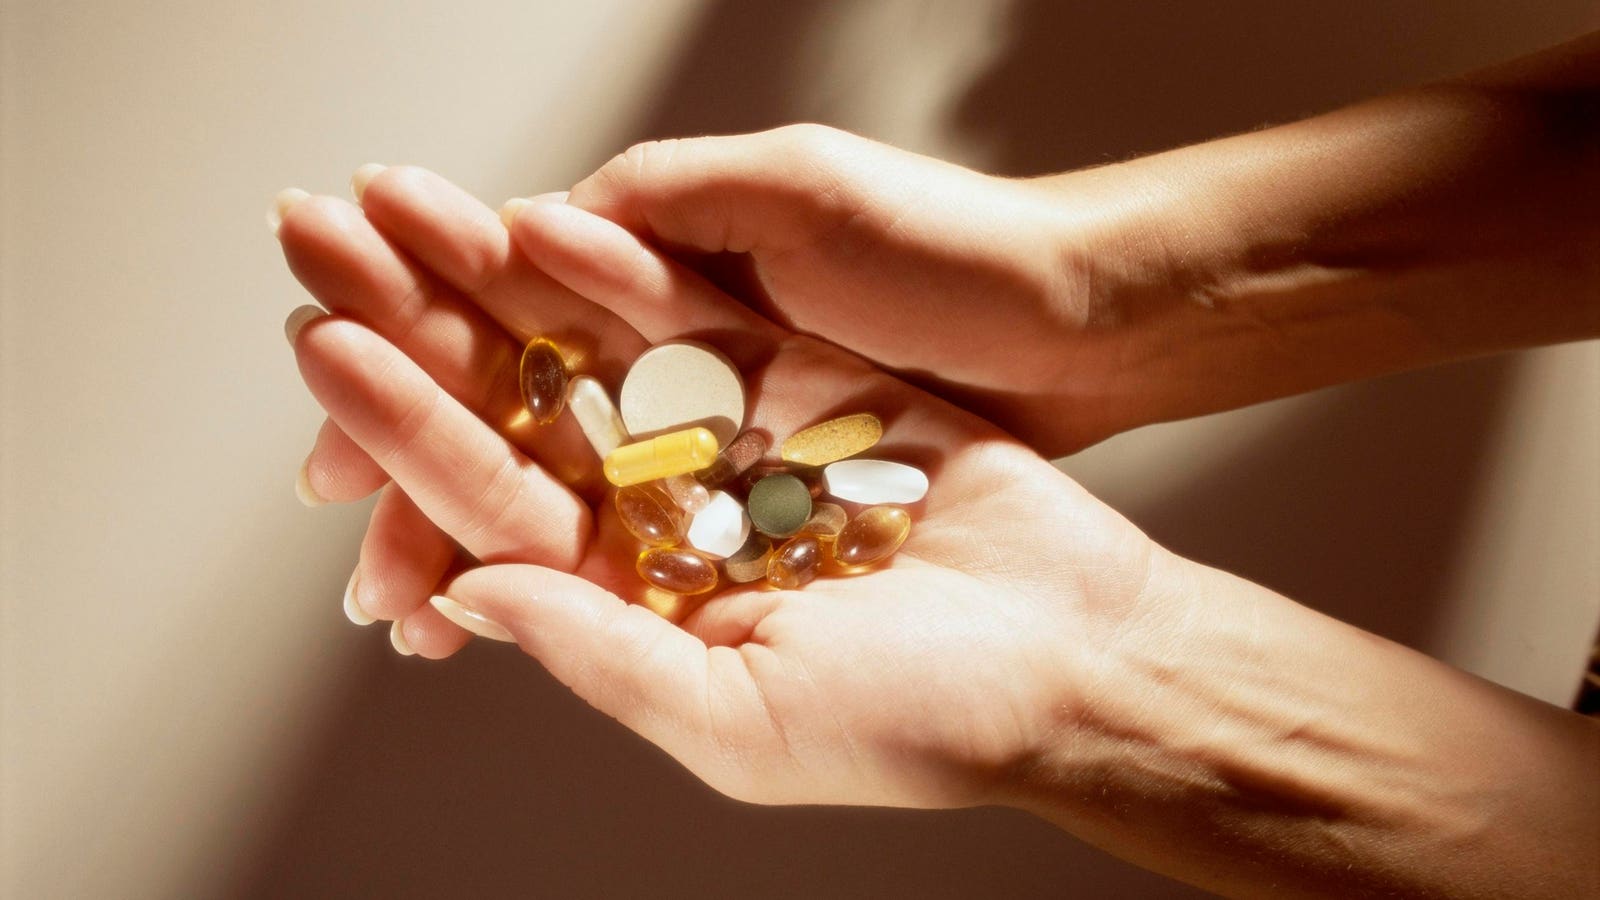 Daily Multivitamins Won’t Help You Live Longer, Study Suggests